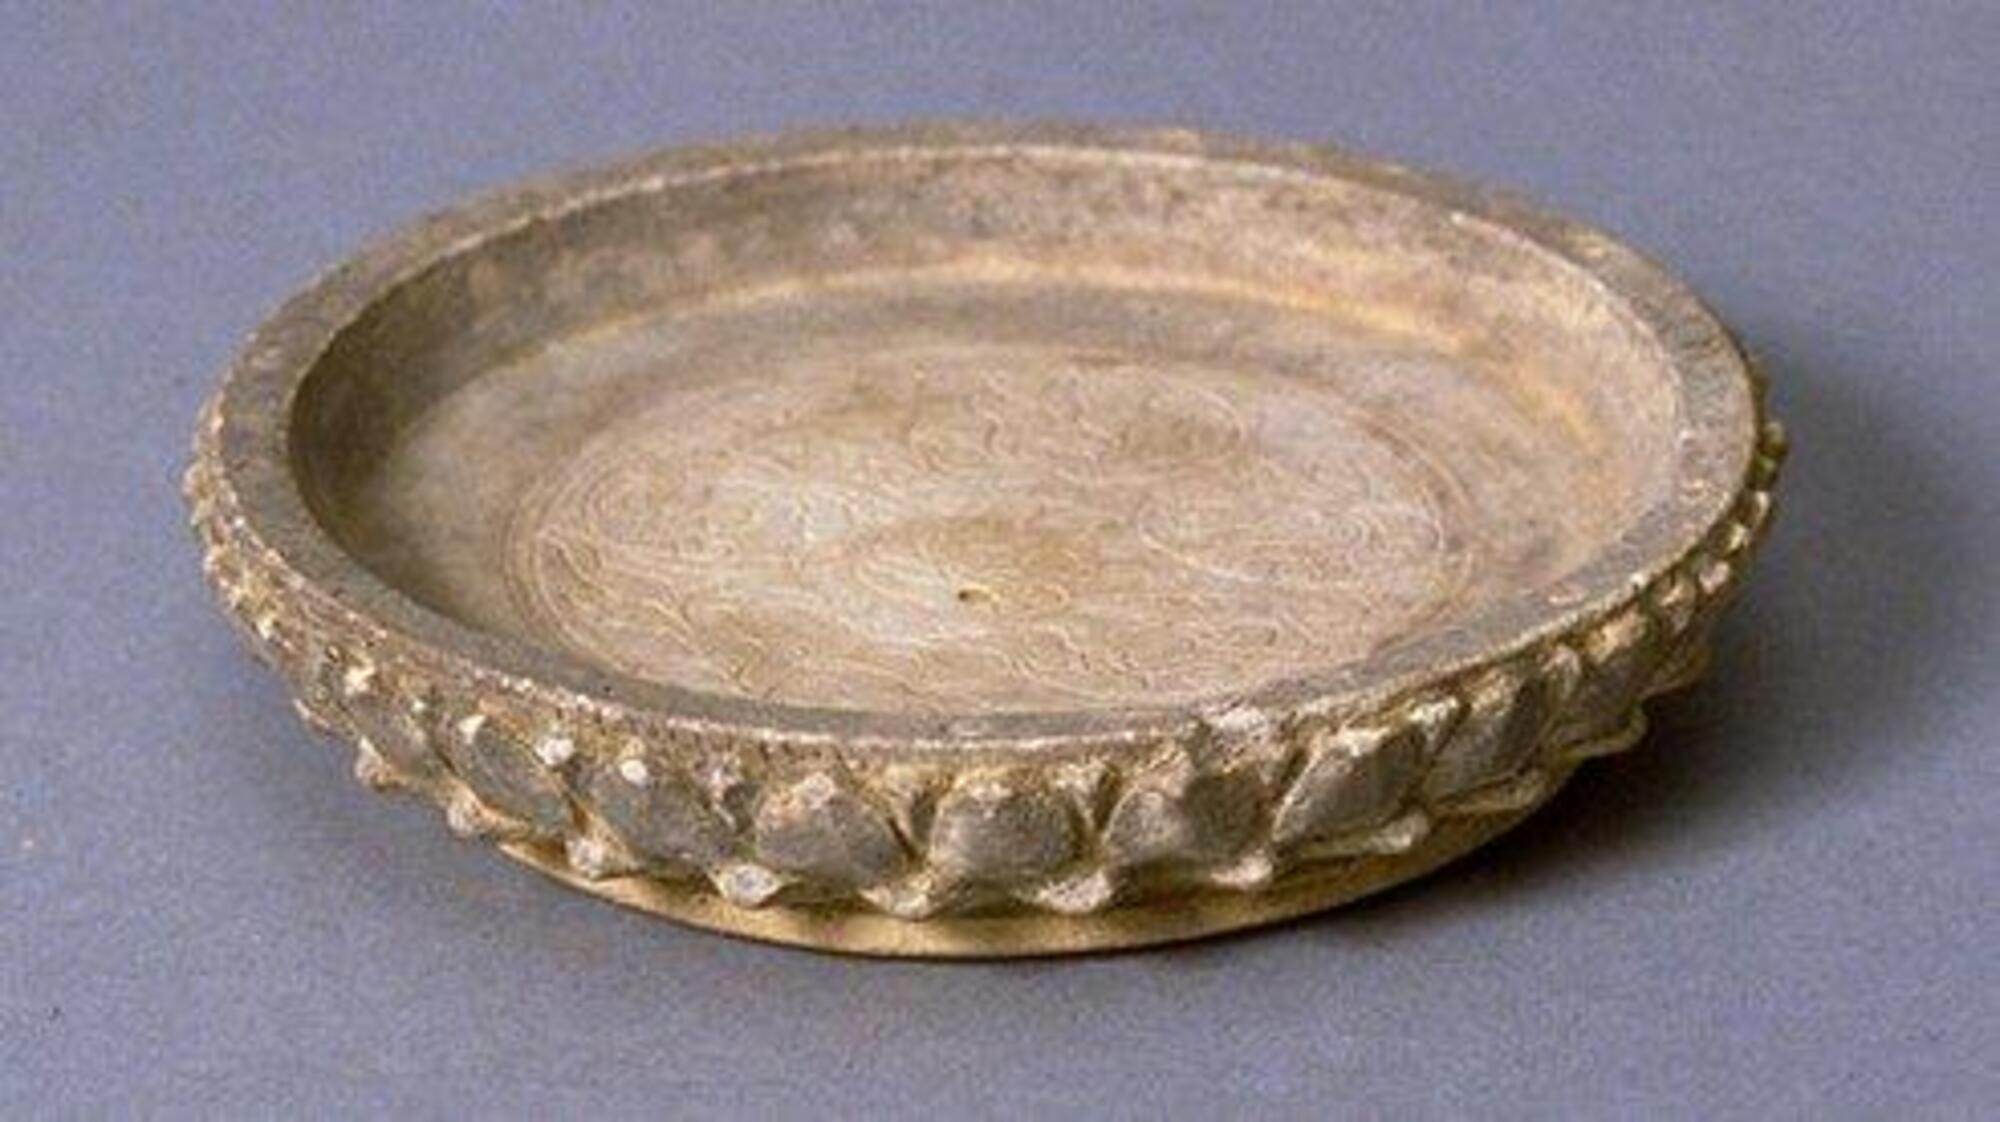 A nearly flat, large, shallow stoneware dish, the interior with a delicately incised floral scroll pattern, and the upturmed rim adorned with robustly modelled lotus petals, all on a broad and secure foot.